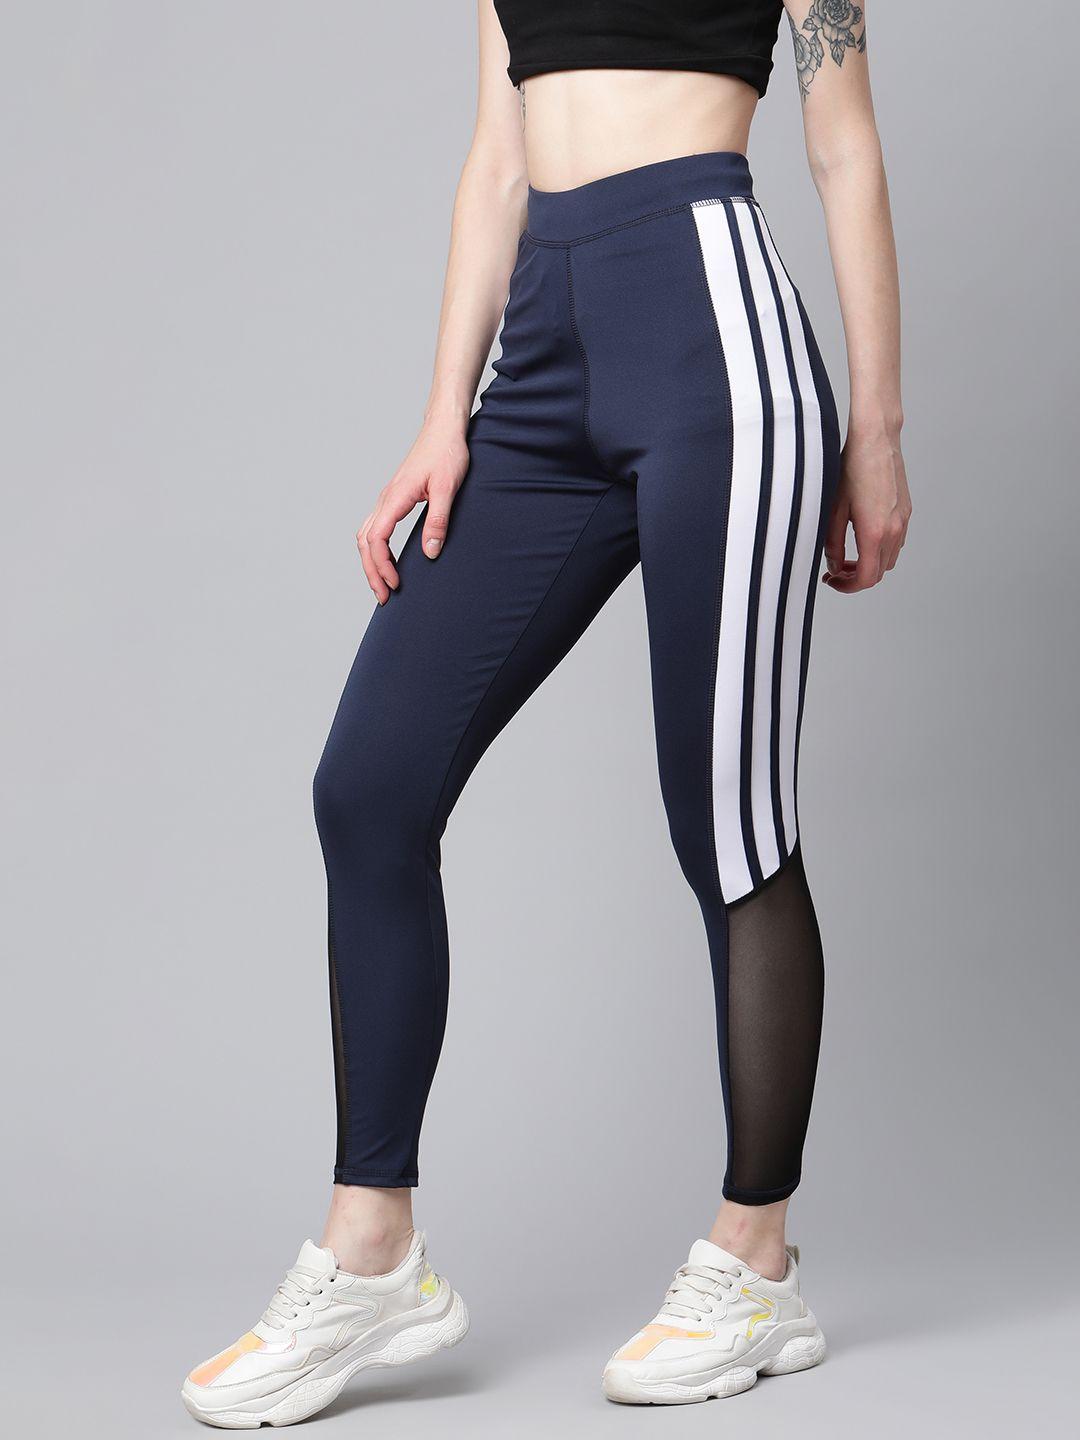 blinkin women navy blue & white solid training tights with mesh inserts detail